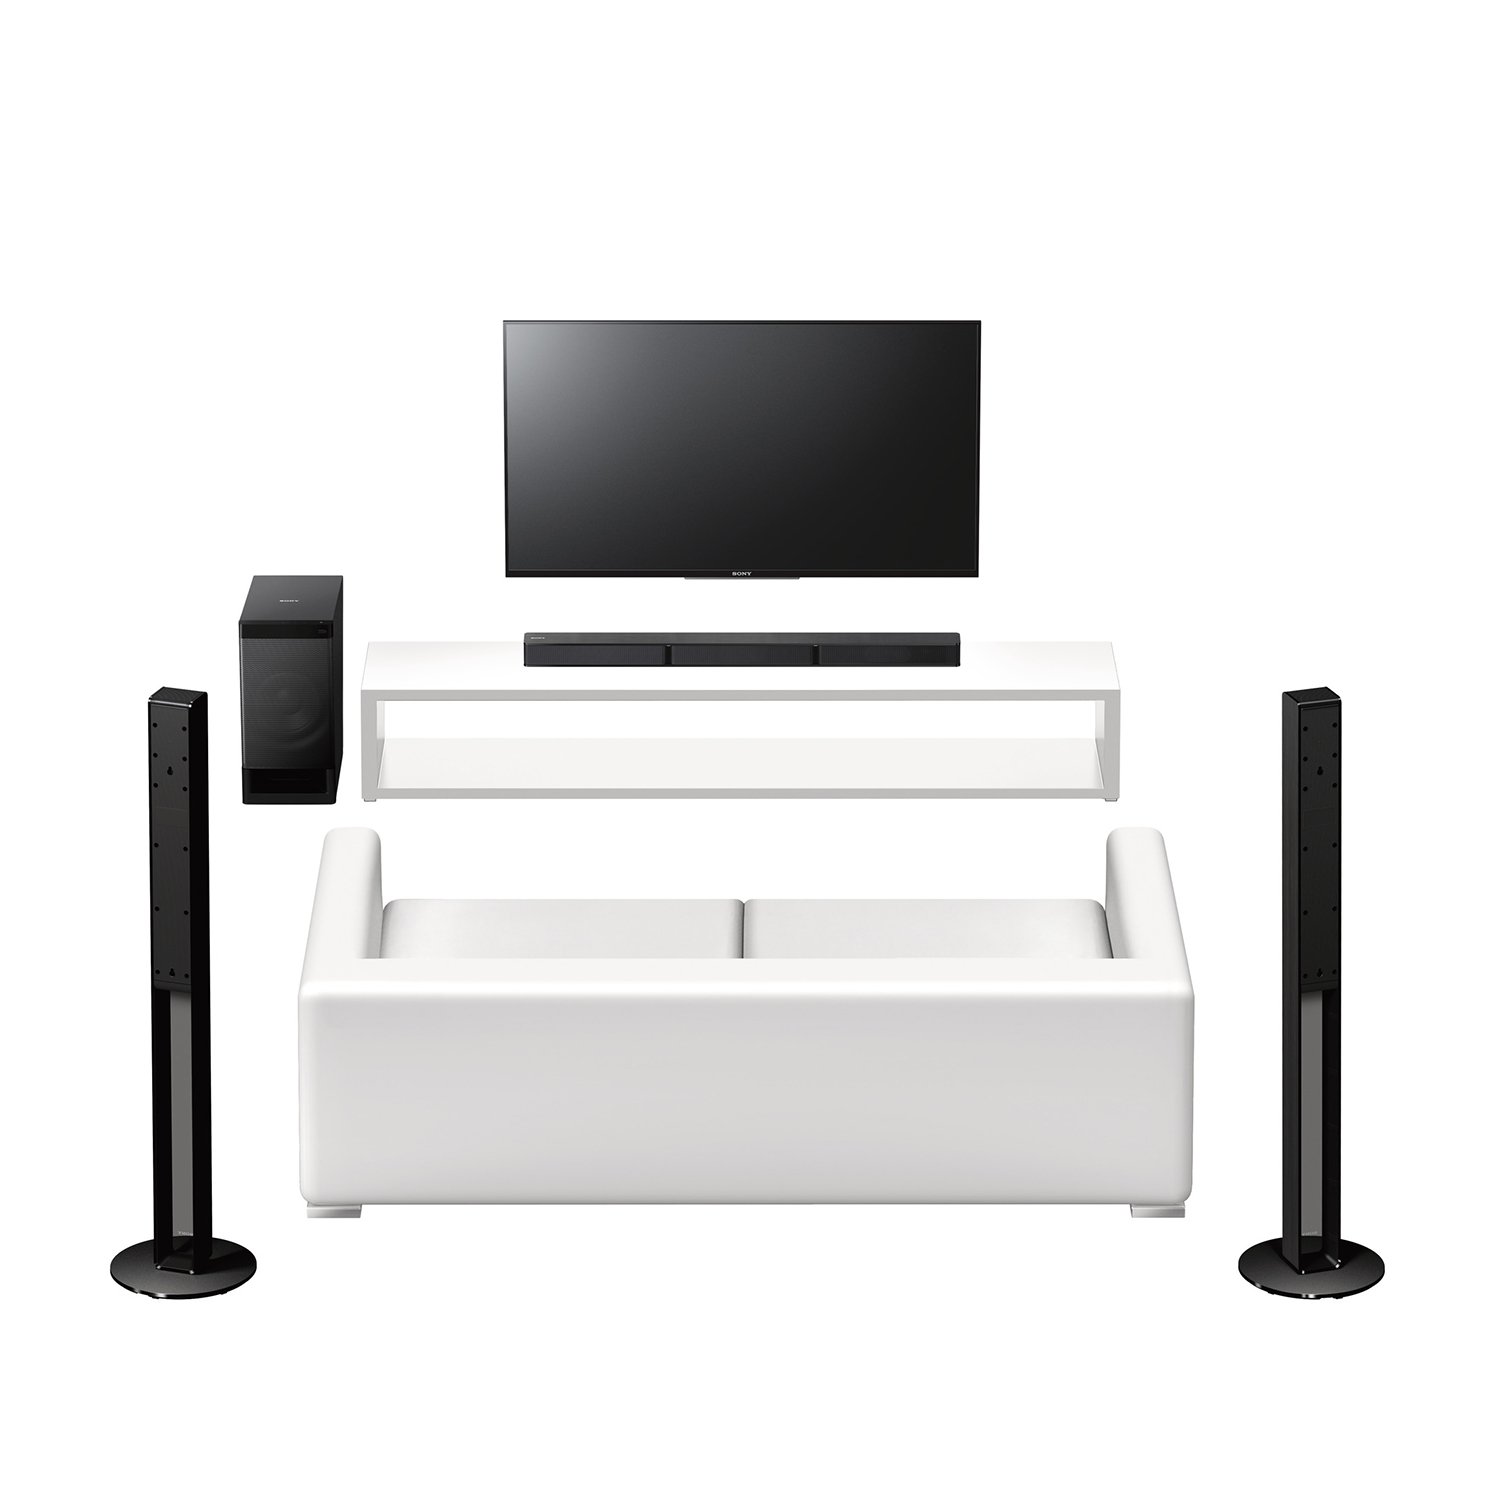 SONY HOME THEATRE HT-RT40